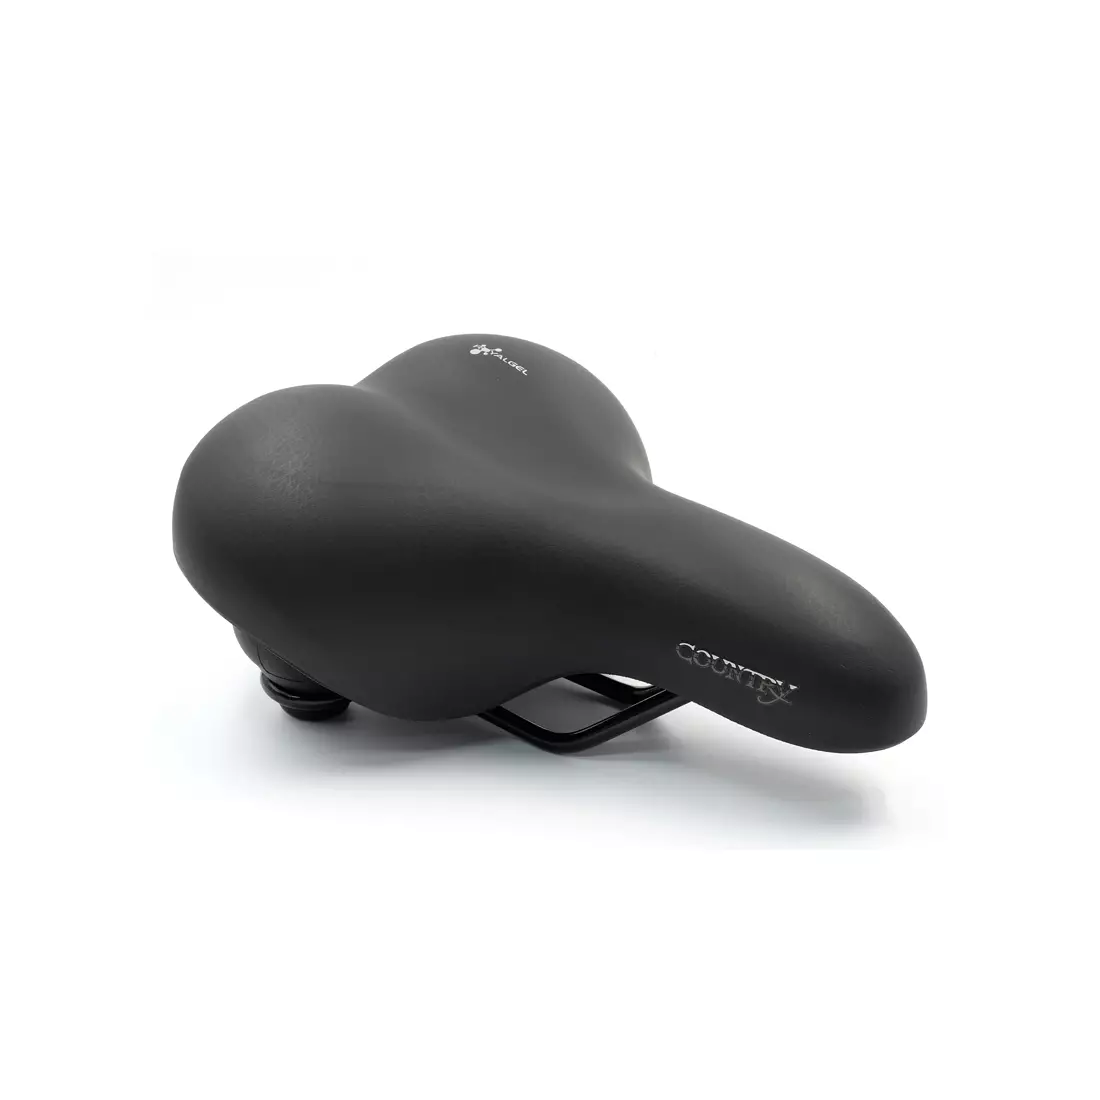 SELLEROYAL CLASSIC RELAXED bicycle saddle 90st. COUNTRY żelogelwe unisex SR-8275DGEB18067